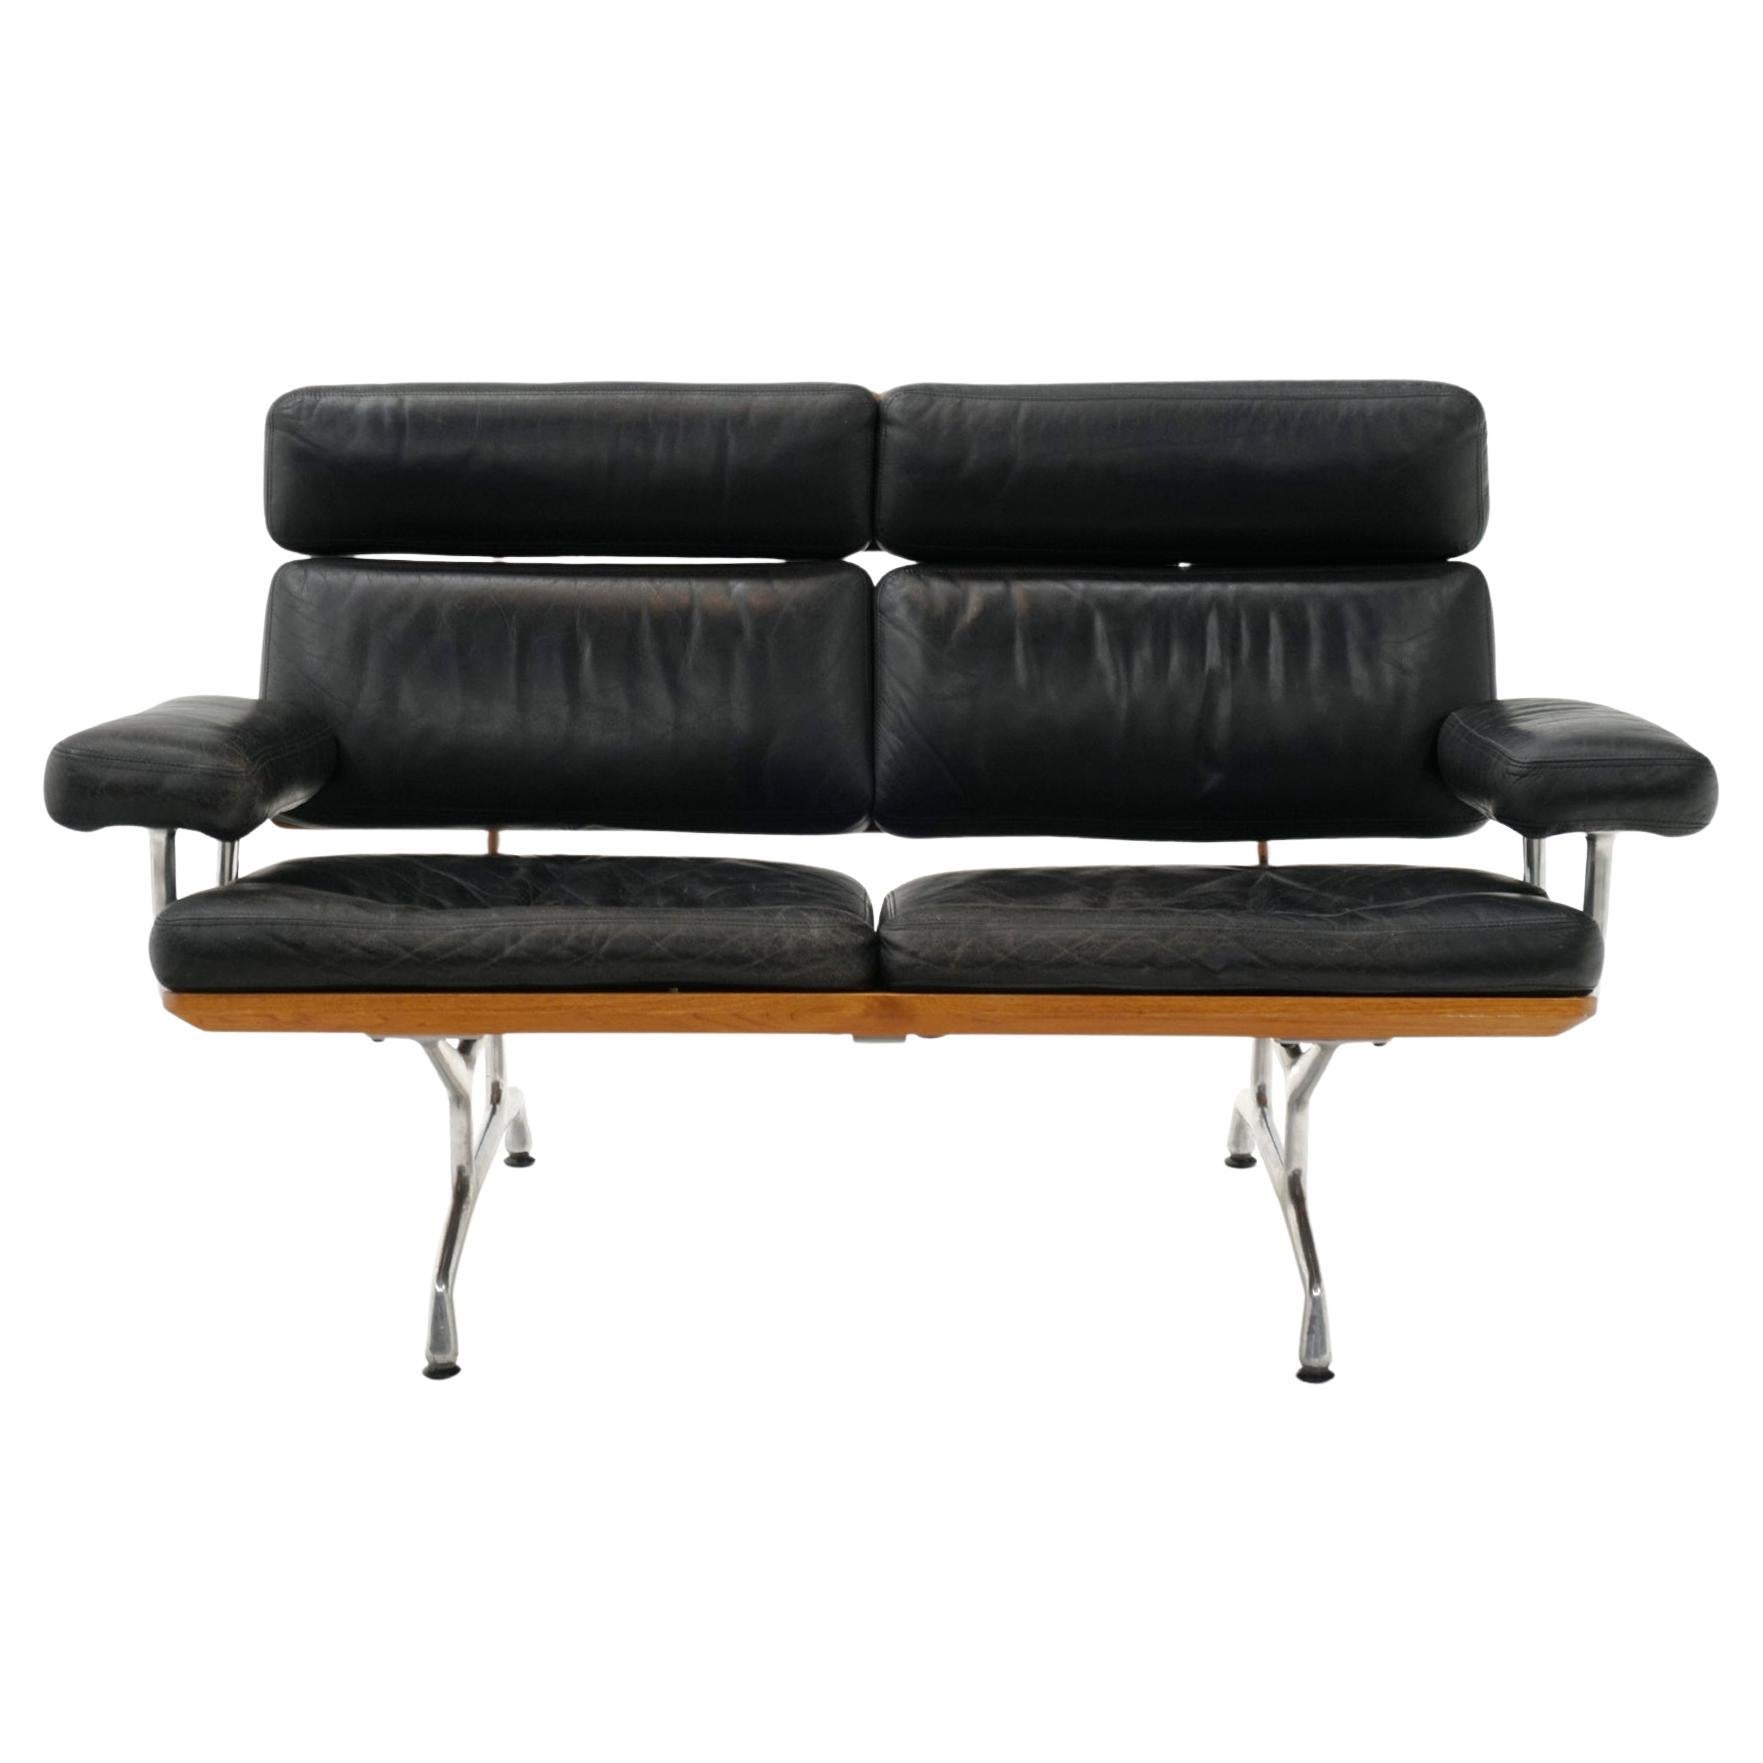 2 Seat Sofa Settee by Charles and Ray Eames, Teak and Black Leather